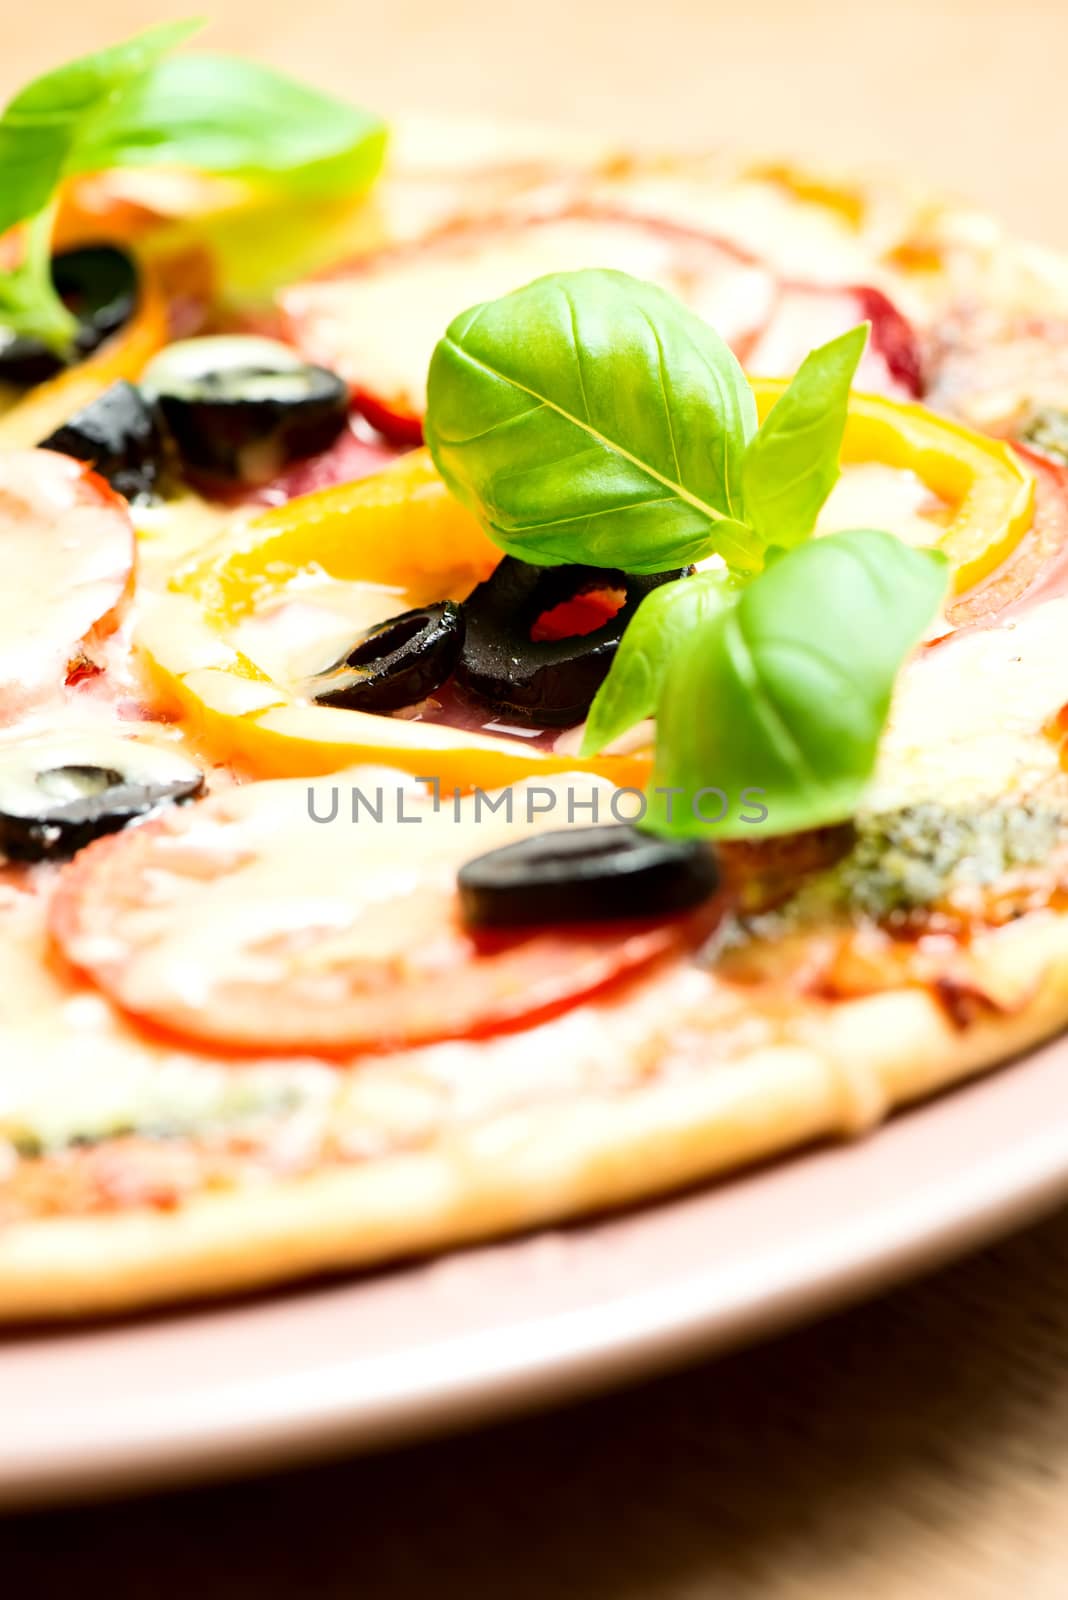 Italian pizza with olives, cheese, pepper and herbs